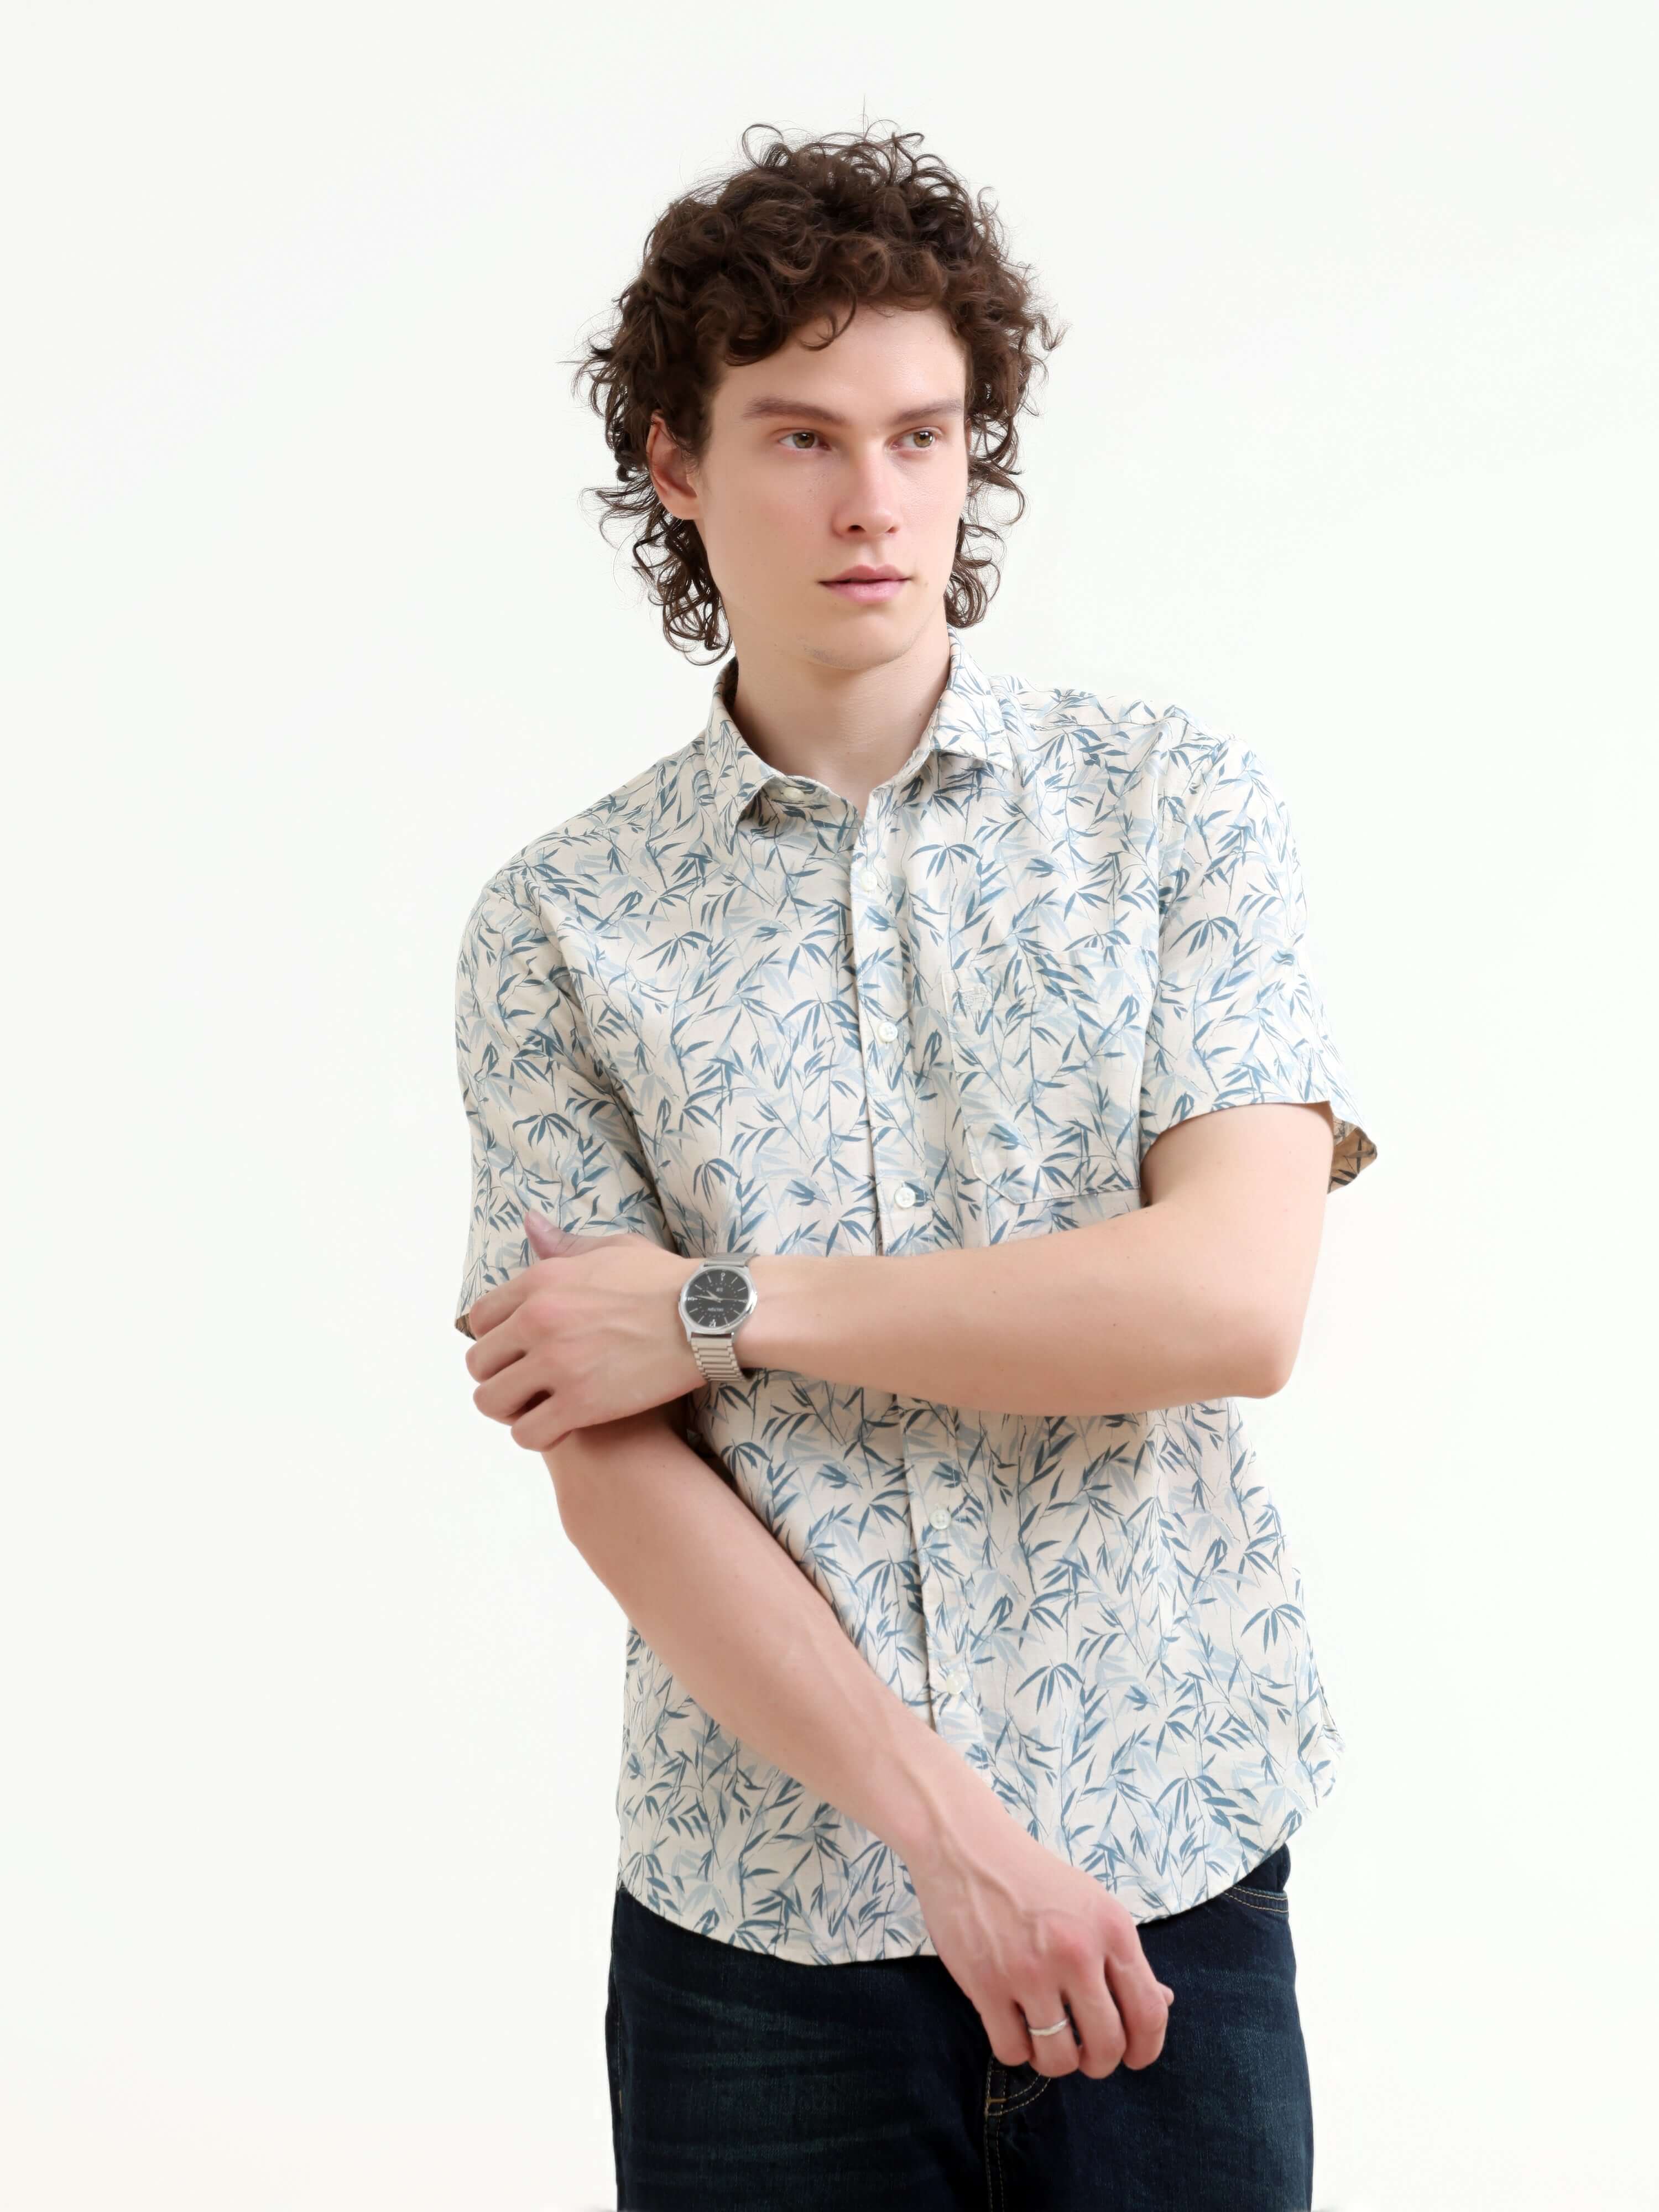 Men's Tropical Sage Teal Shirt - New Summer Arrival shop online at Estilocus. Embrace summer style with our new arrival - men's tropical sage pastel teal shirt. Perfect for casual wear and sunny vibes.